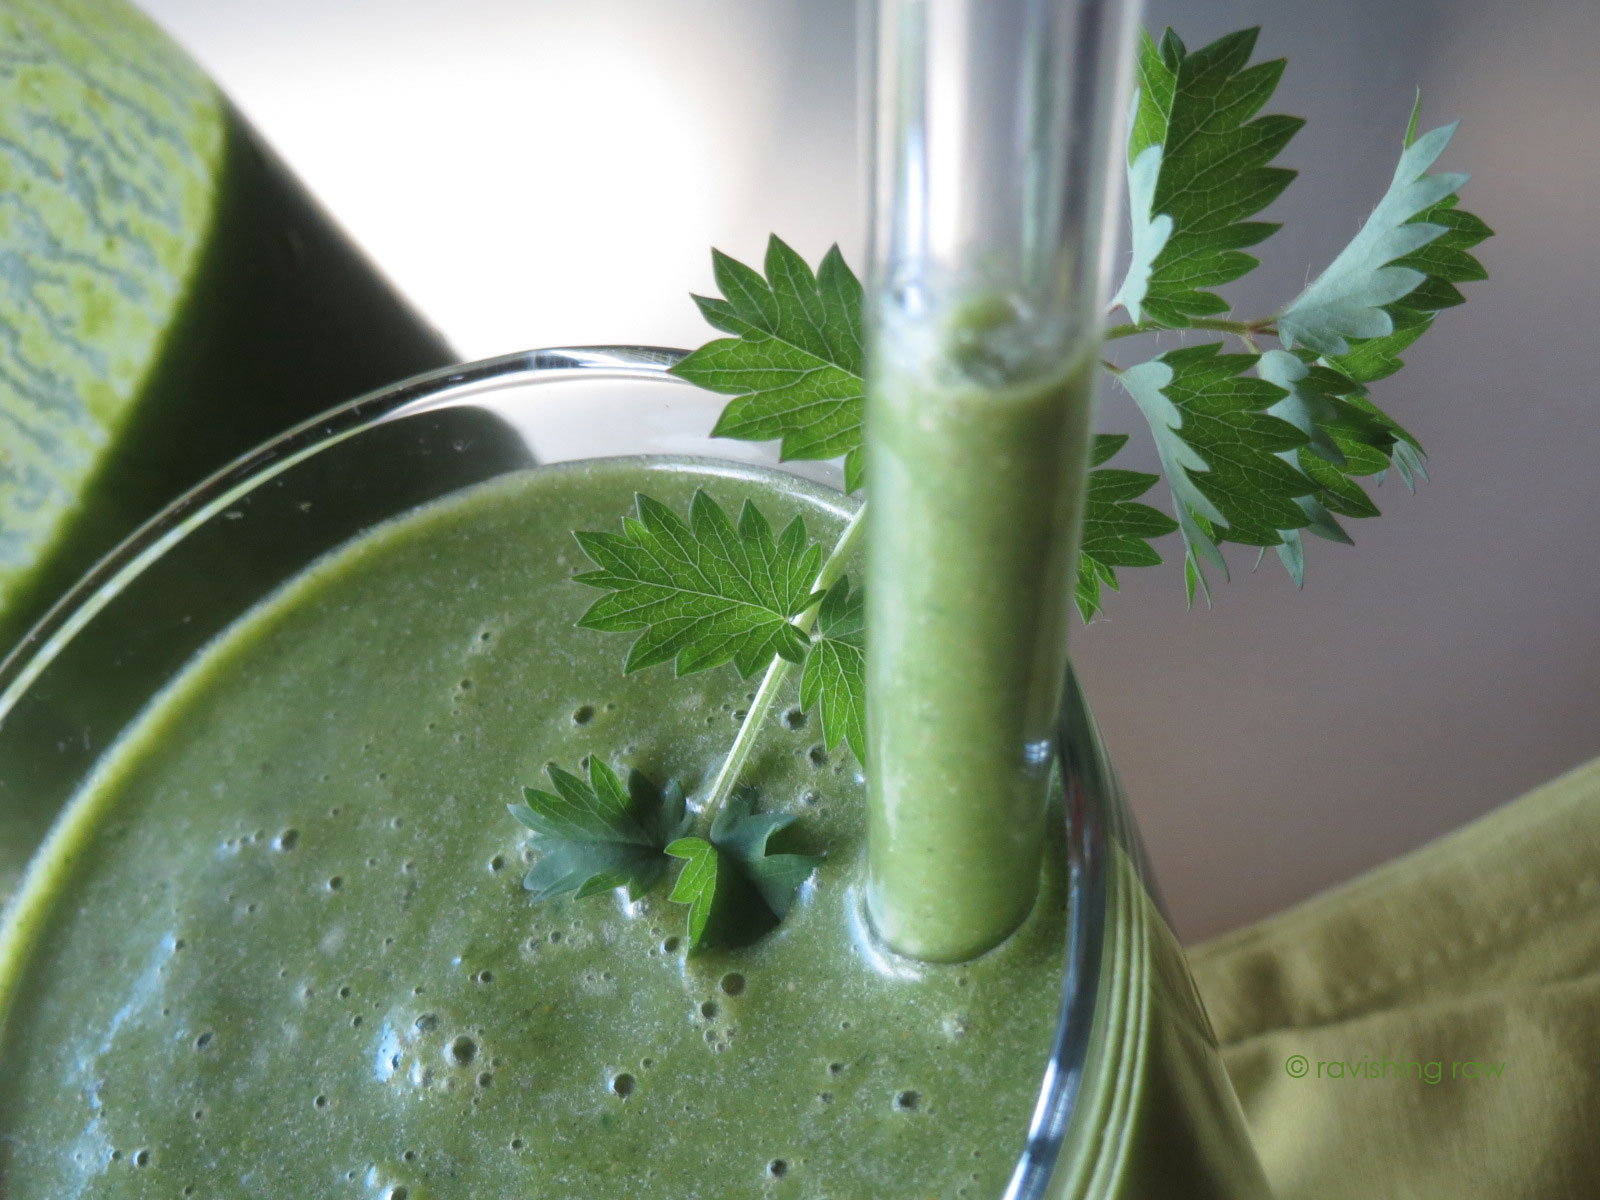 start your day green: yummy smoothie